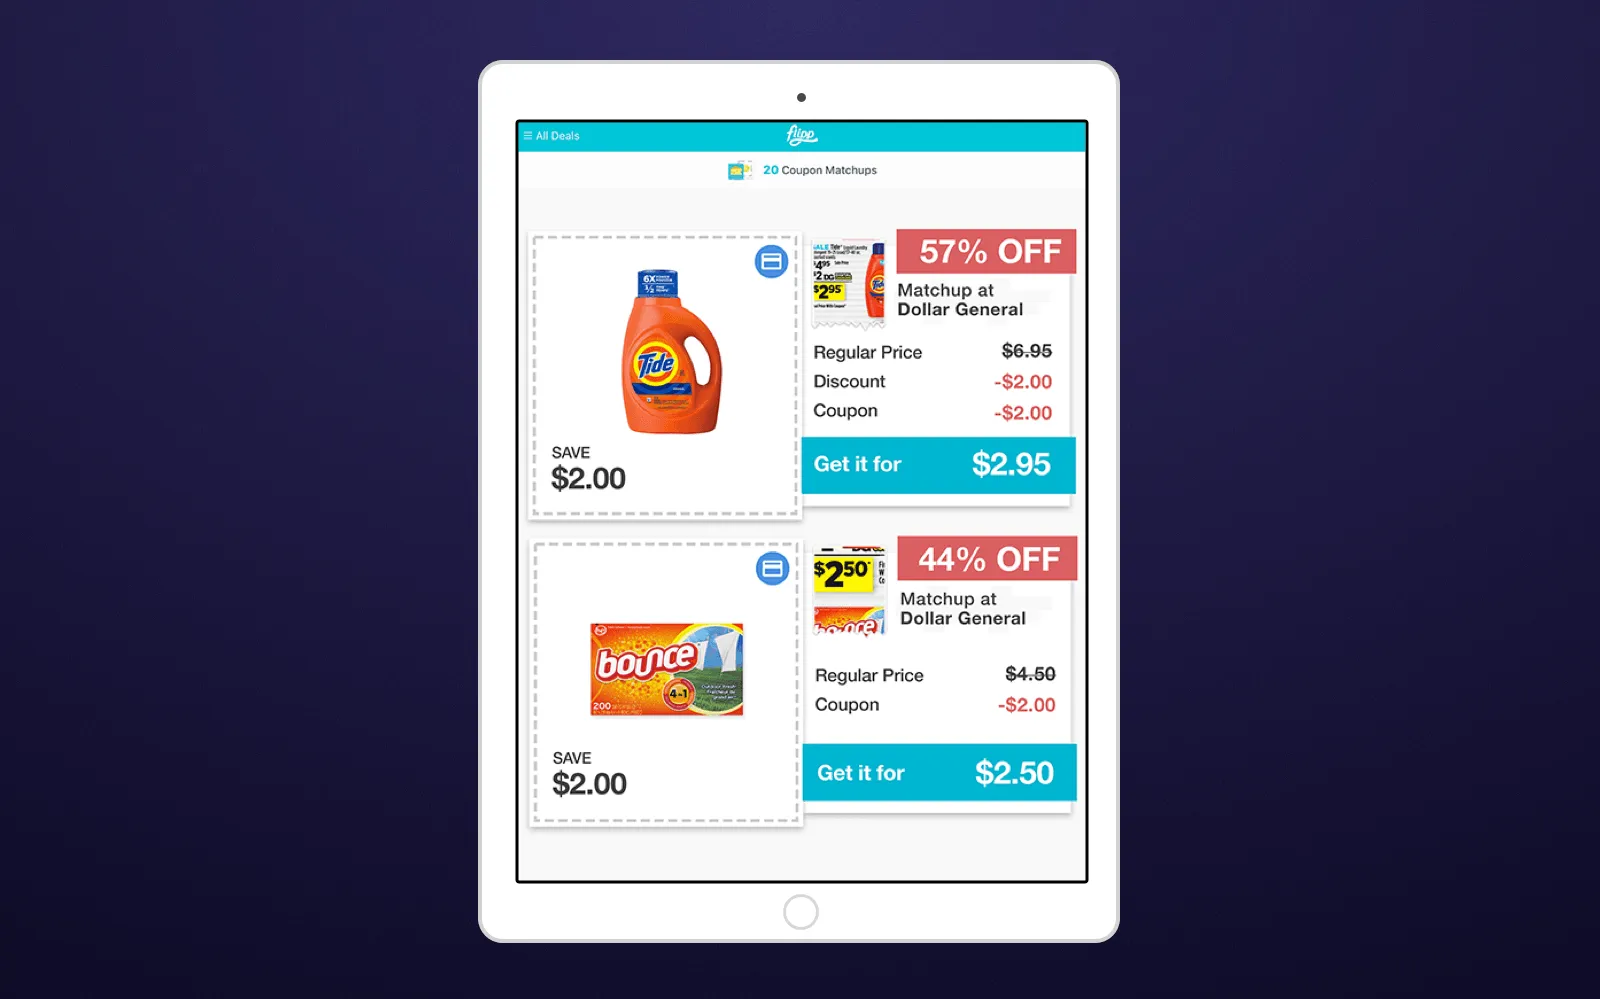 Grocery discount app that provides coupons